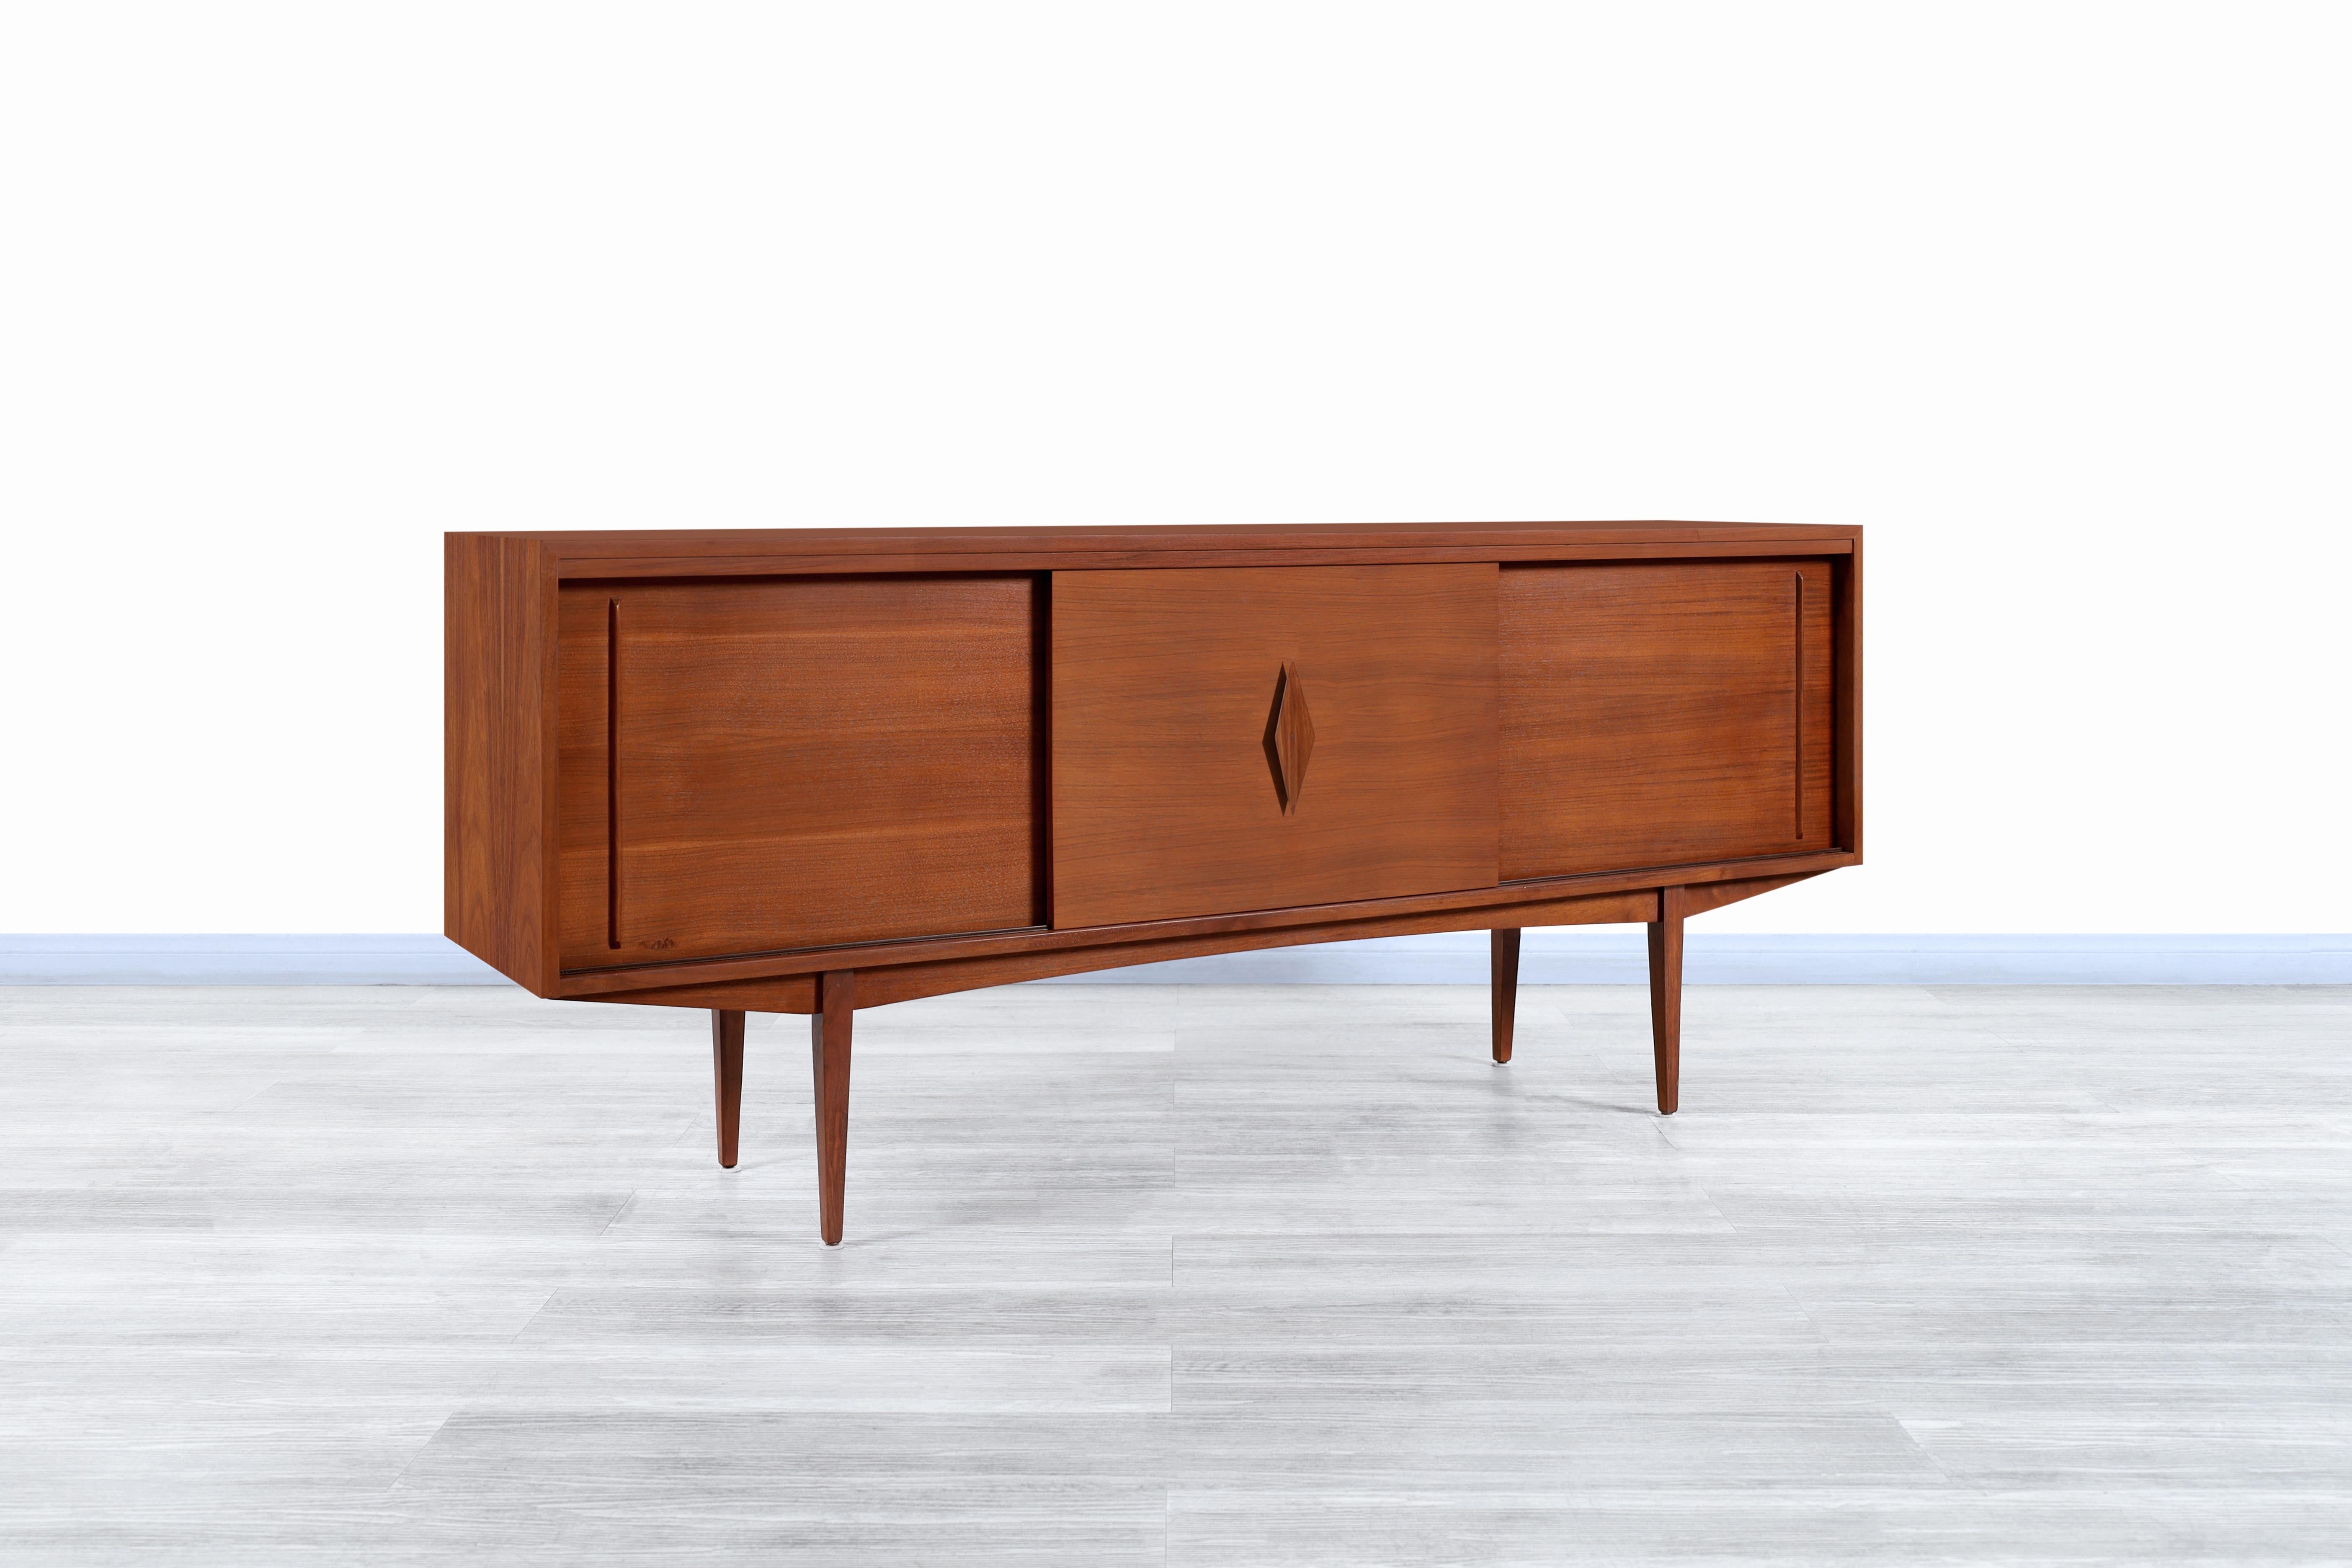 Stunning Mid-Century Modern walnut credenza designed and manufactured in the United States, circa 1960s. This credenza has a Minimalist design but is highly functional. It has been built from walnut wood and gives a unique contrast of colors and